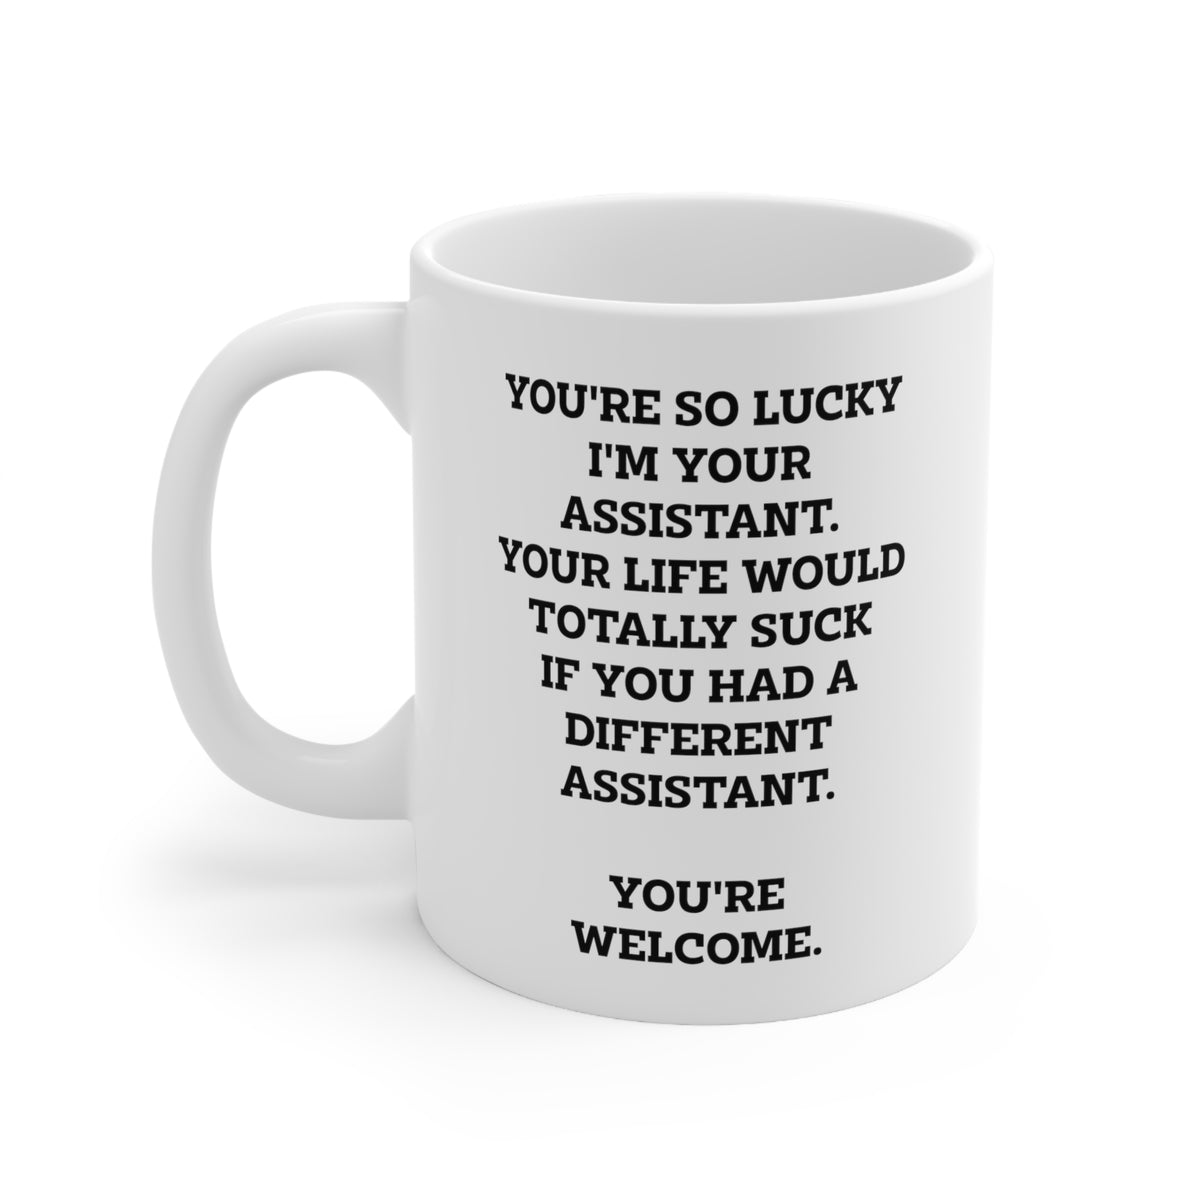 Funny Administrative Assistant Coffee Mug - You're so lucky I'm your Assistant - Gag Gift For Admin